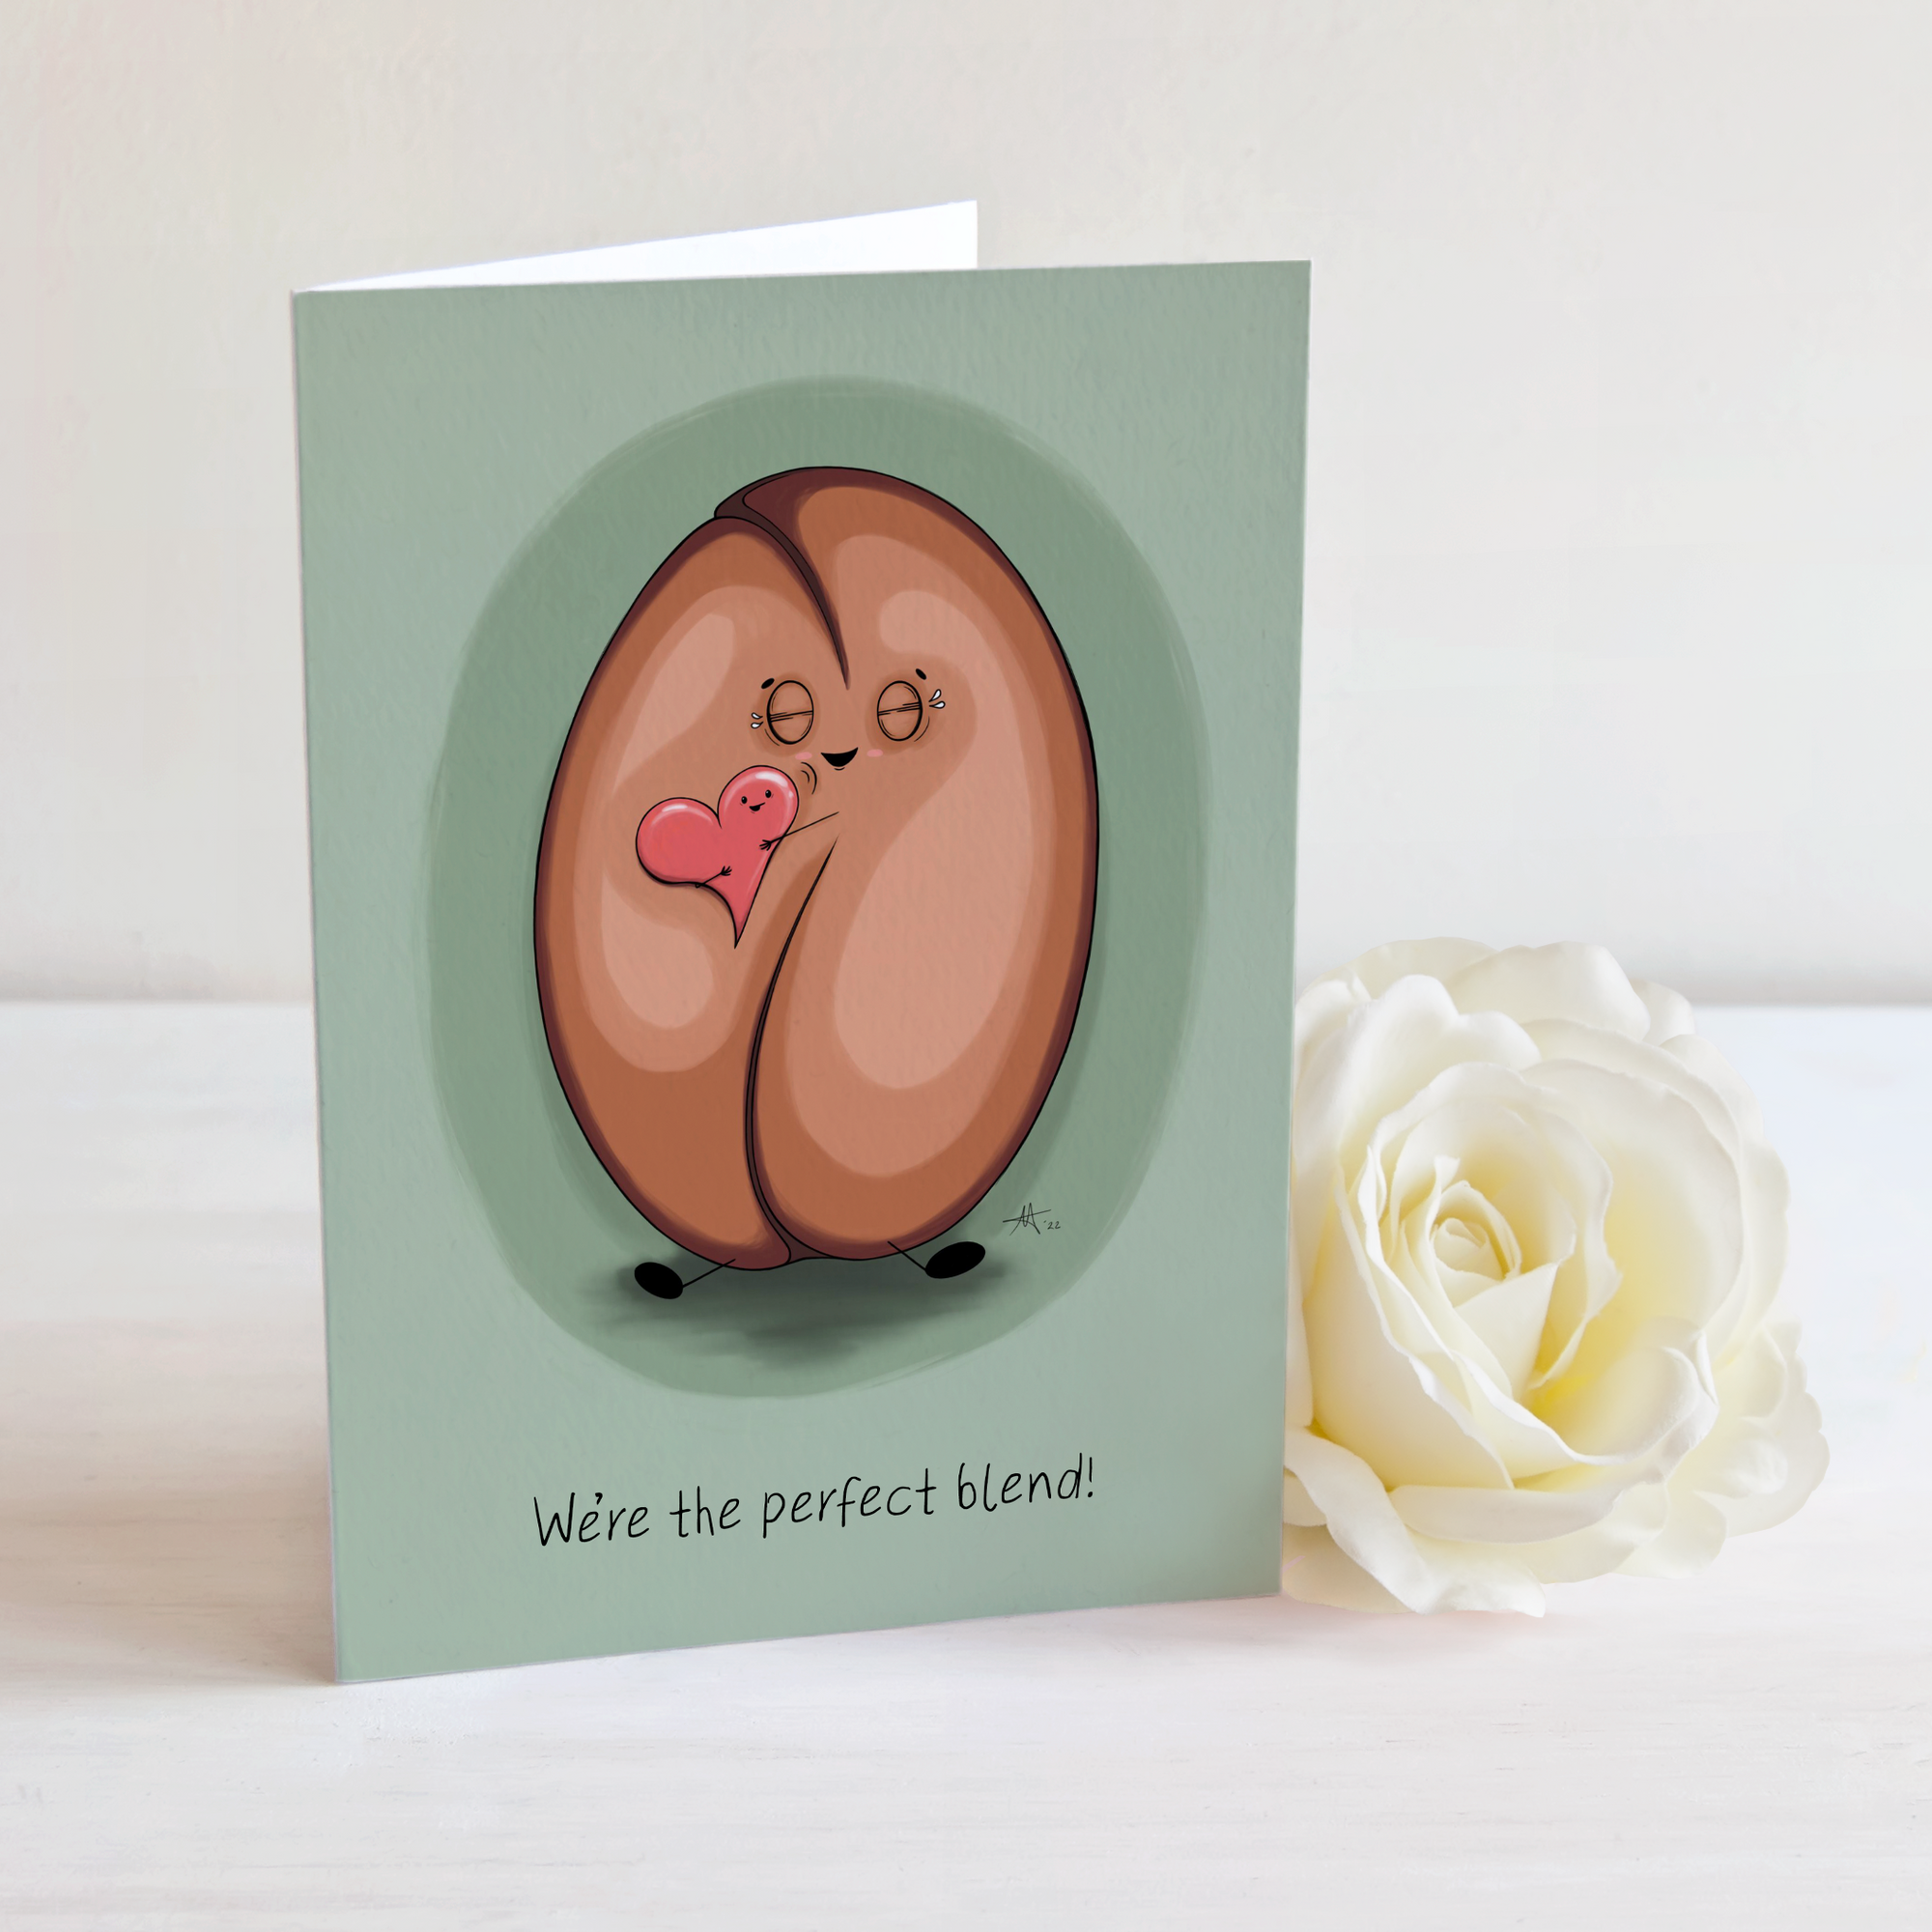 "We're the perfect blend!" - Greeting Card / Small Print